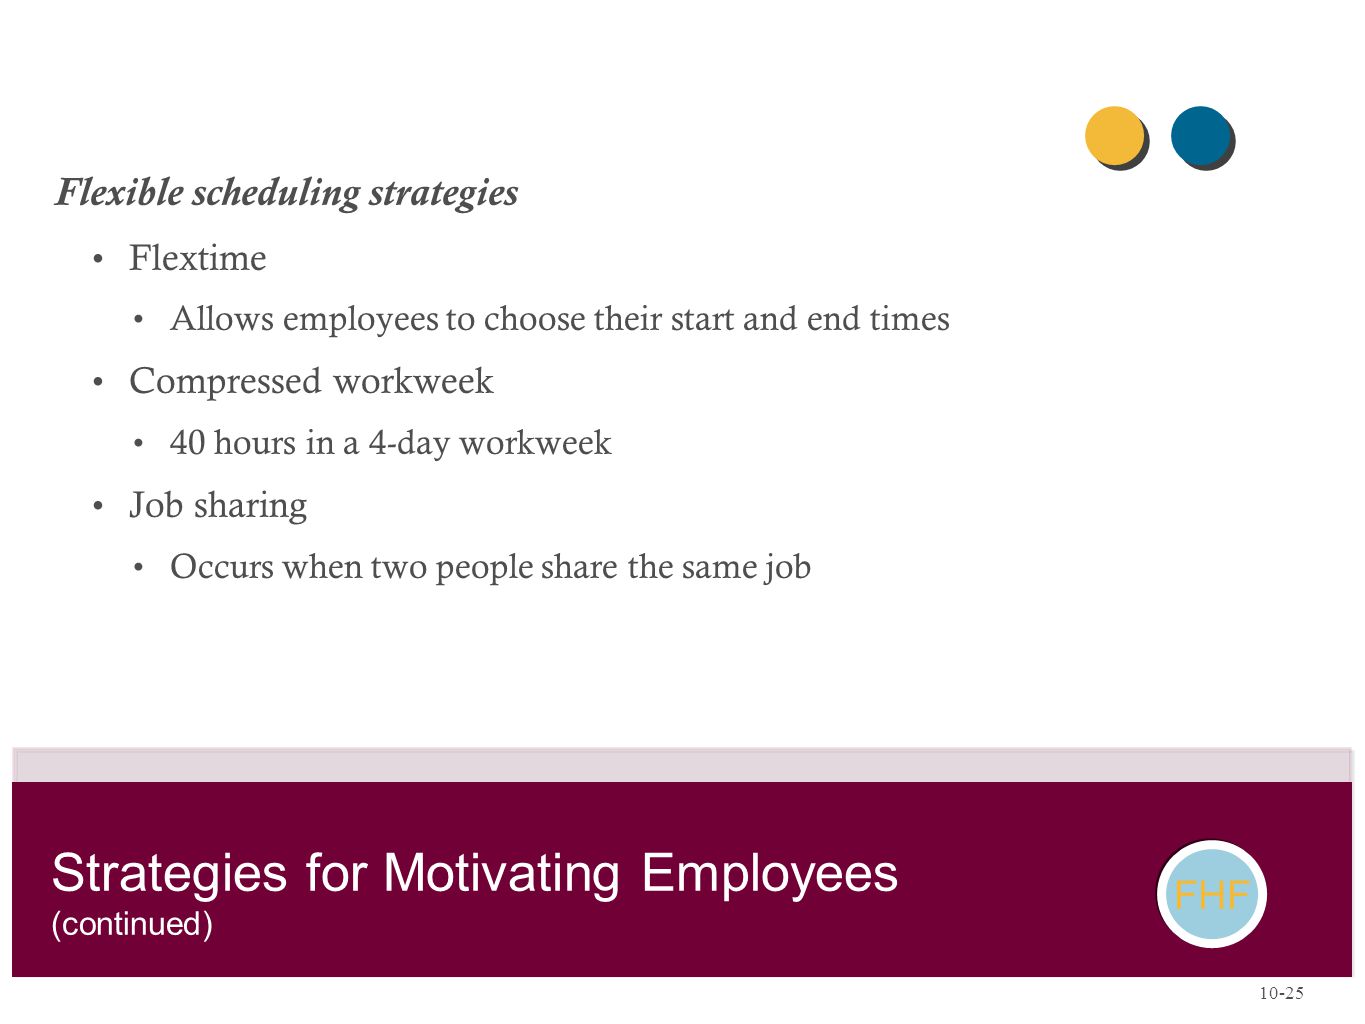 Strategies for Motivating Employees (continued)